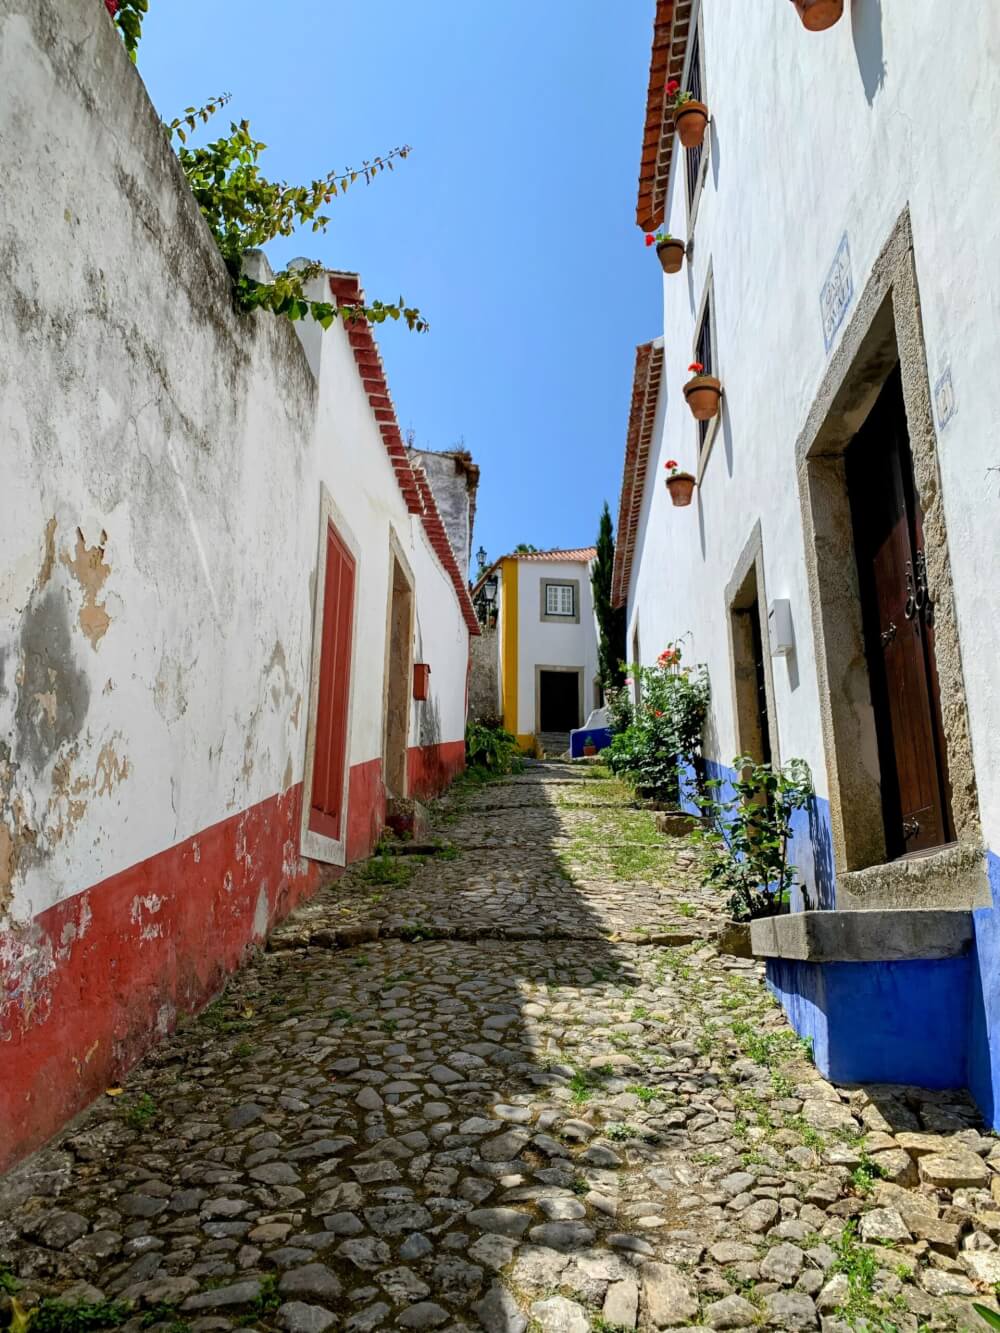 An narrow uphill pedestrian street with white houses on each side.